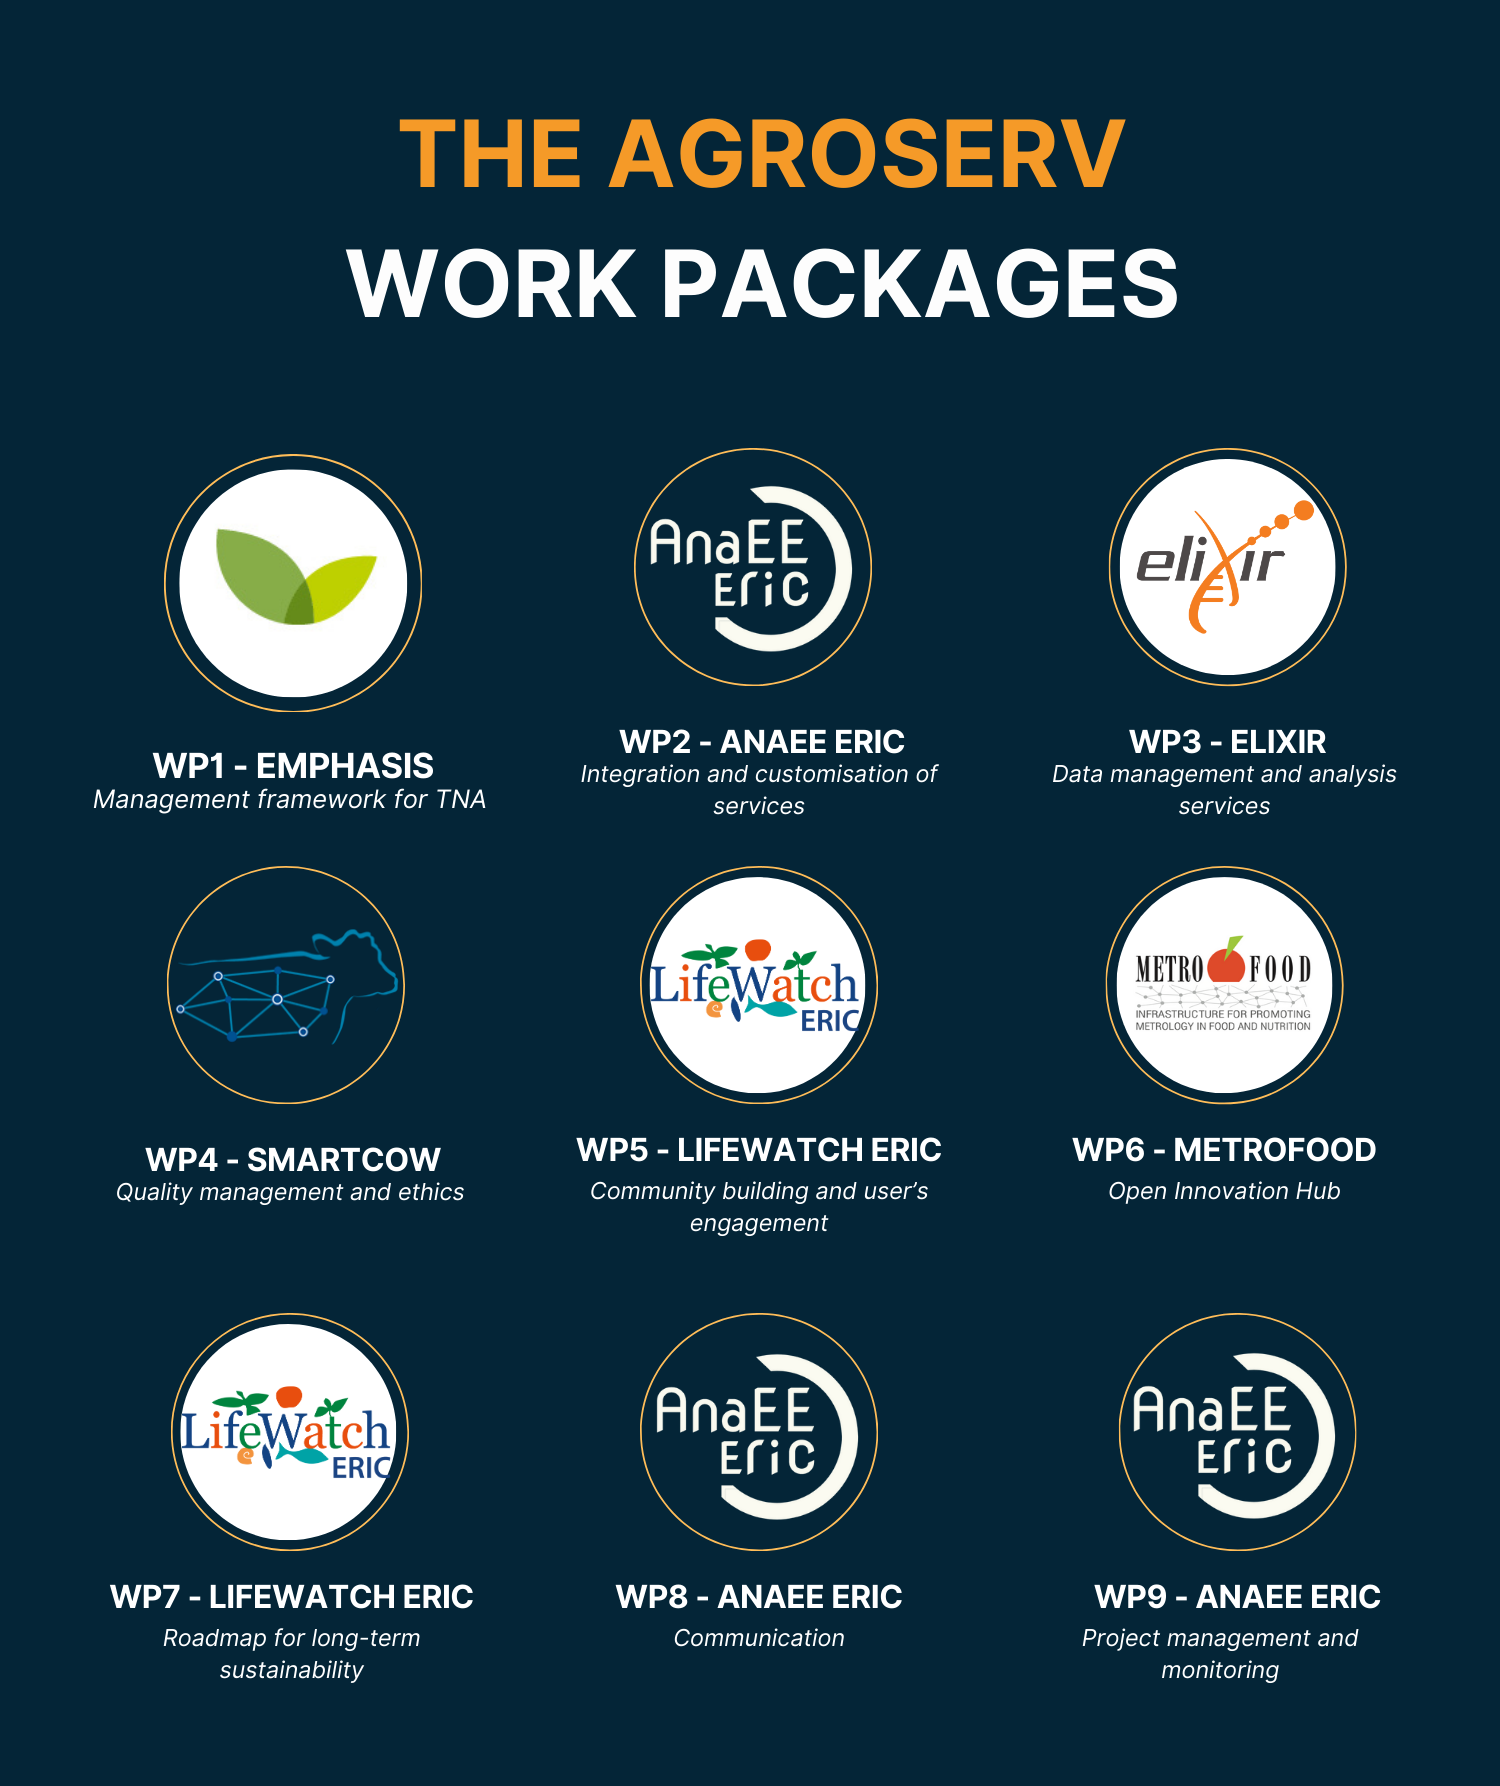 The agroserv workpackages